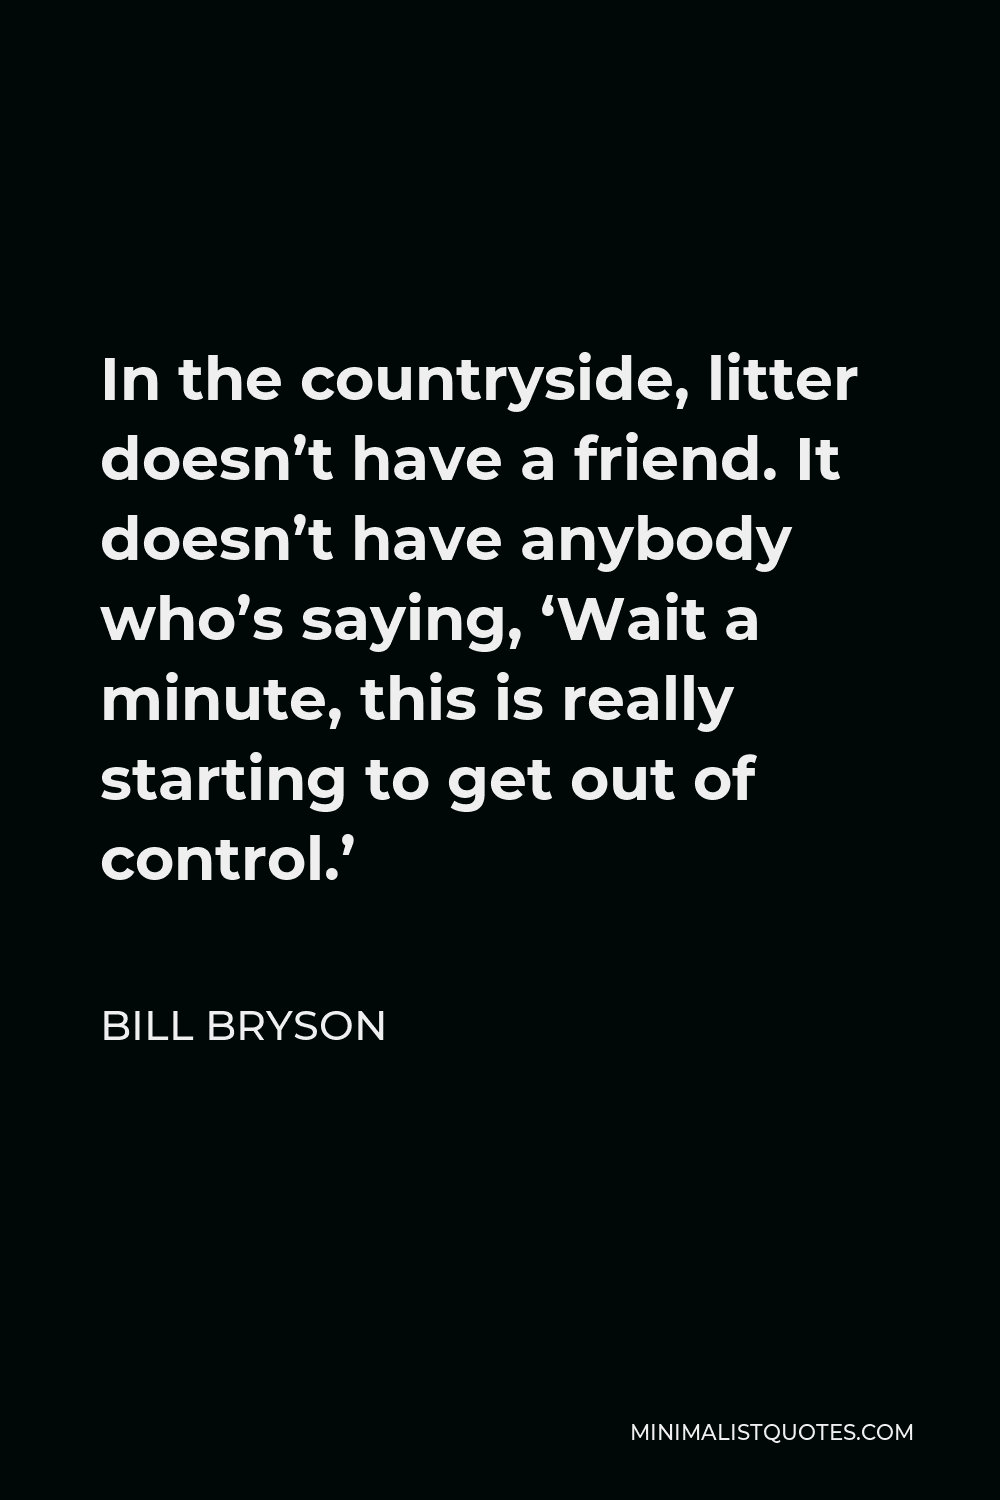 Bill Bryson Quote - In the countryside, litter doesn’t have a friend. It doesn’t have anybody who’s saying, ‘Wait a minute, this is really starting to get out of control.’